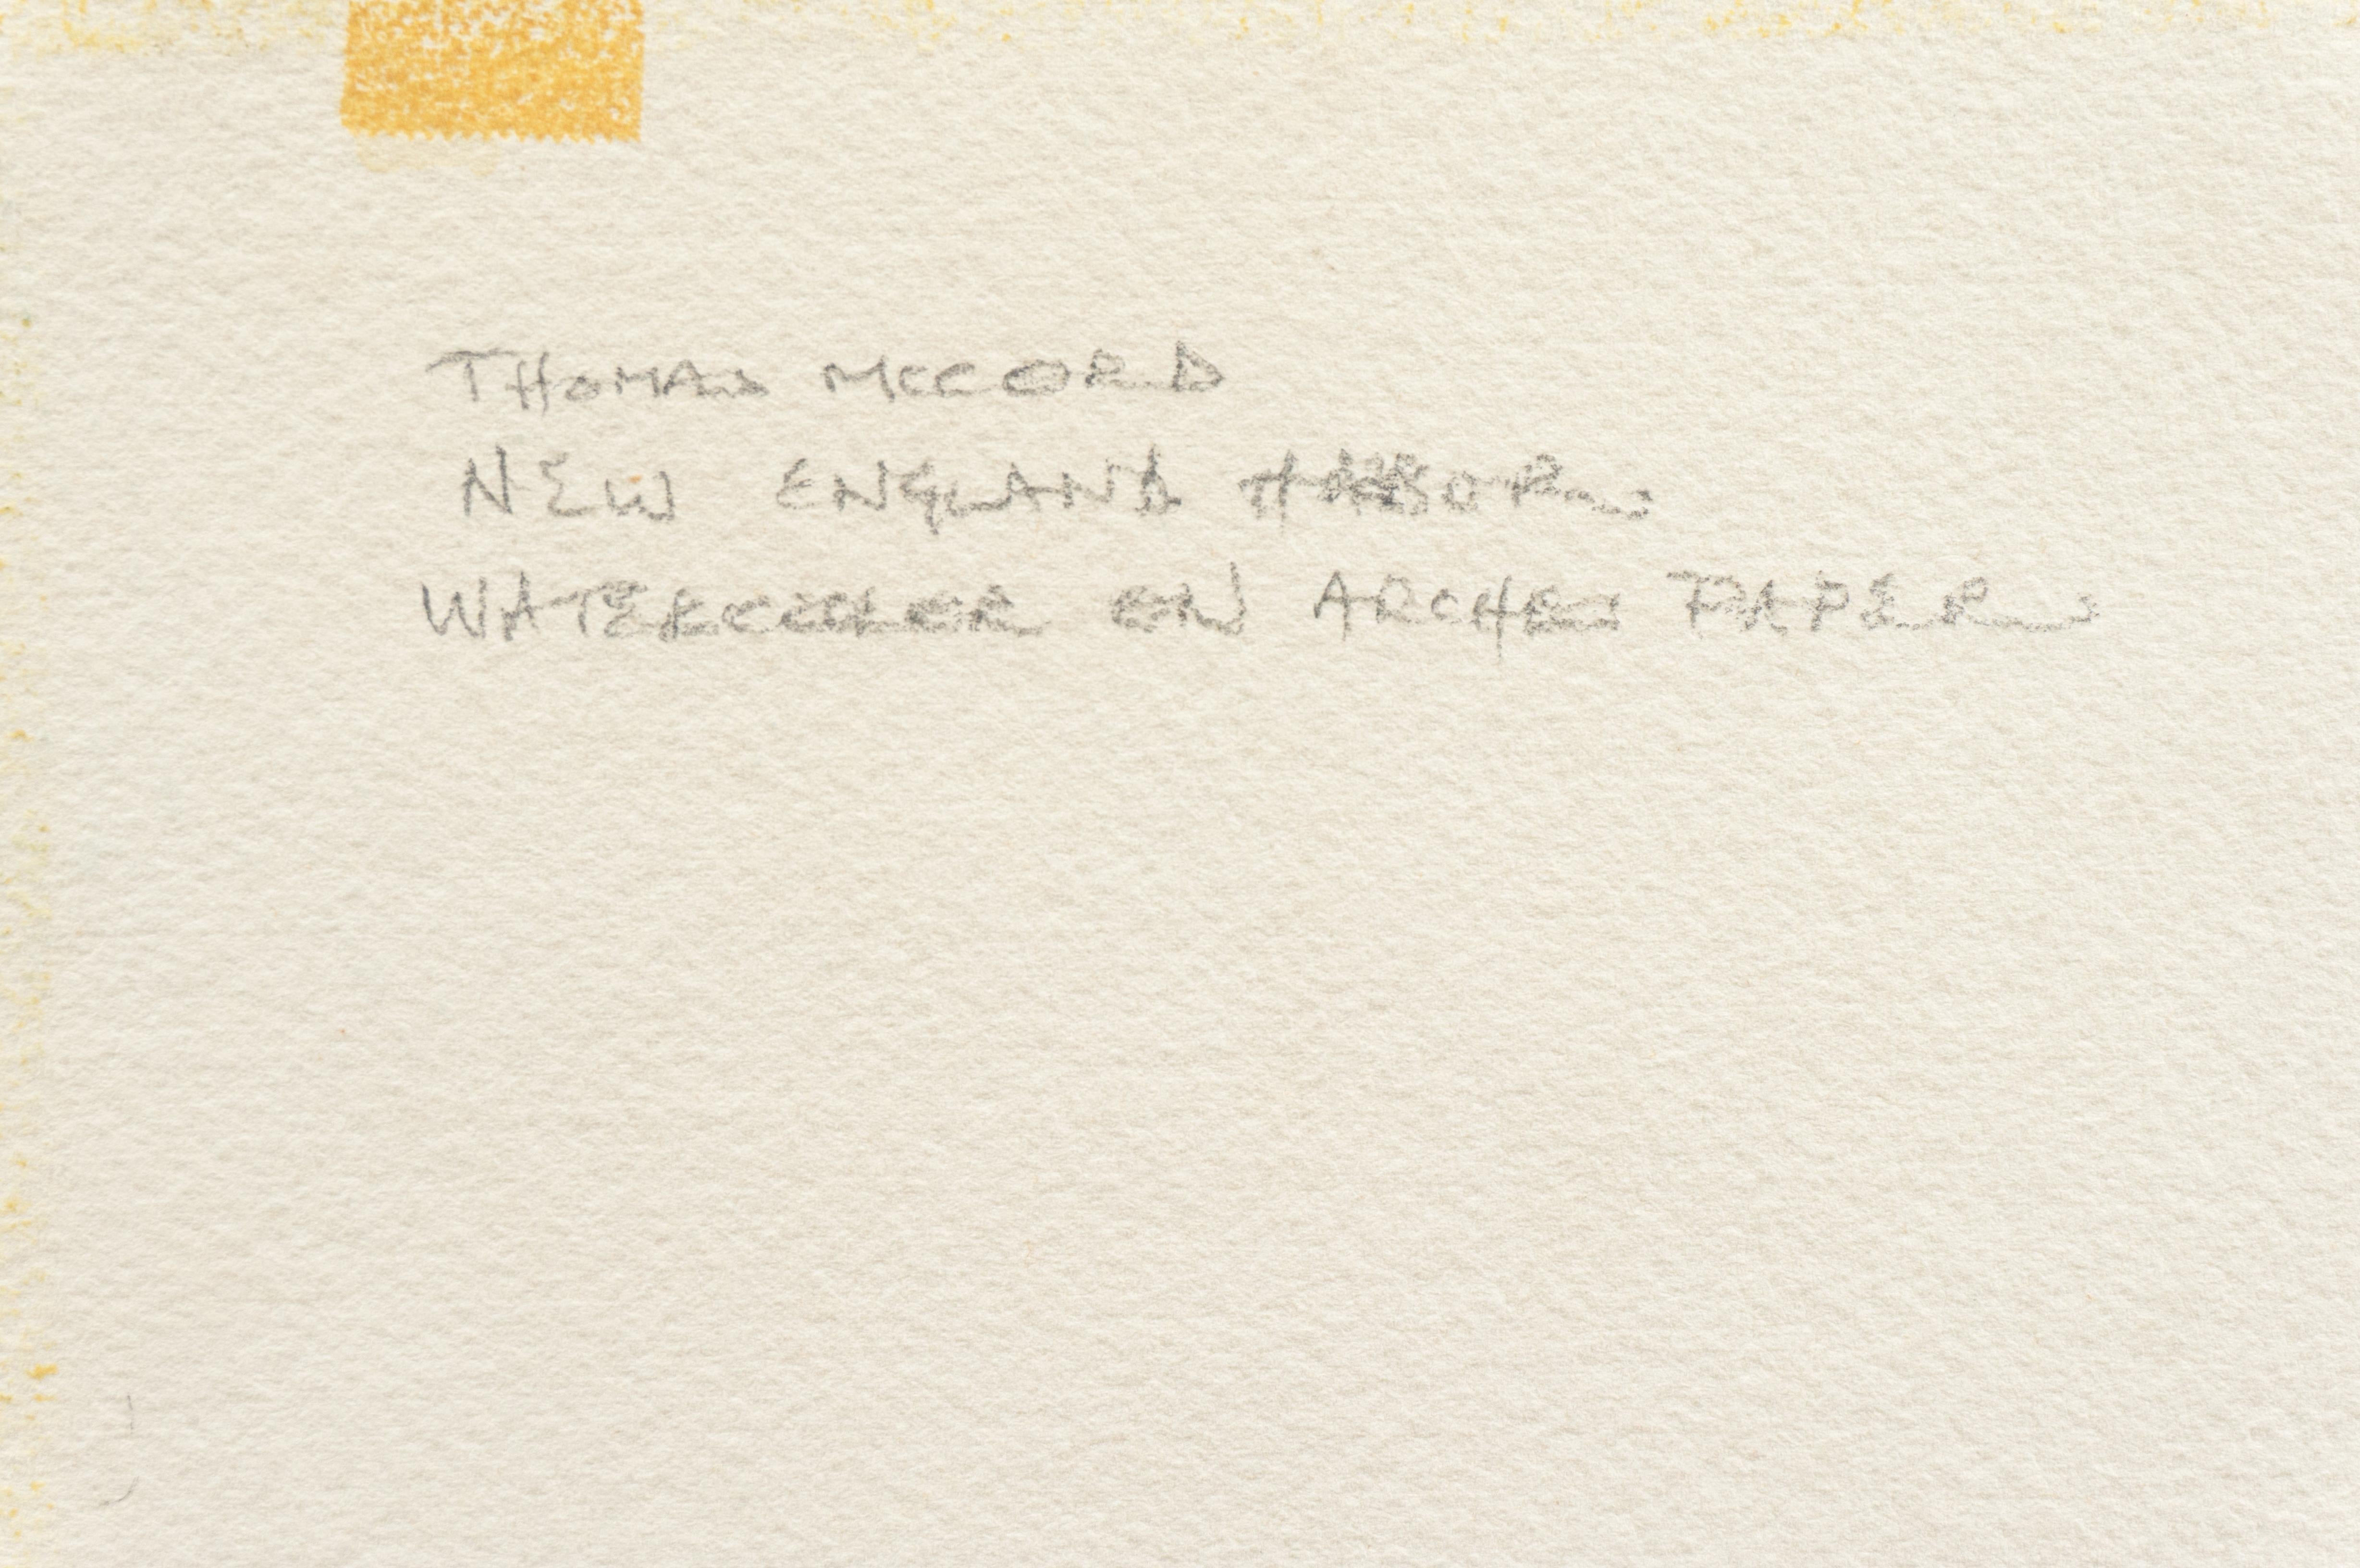 Signed lower right, 'Tom McCobb' for Thomas McCobb (American, 1930-2020); additionally inscribed verso with artist's name, title and medium. 

Tom McCobb began focusing on his watercolor painting in the early 1980s in Connecticut and continued to